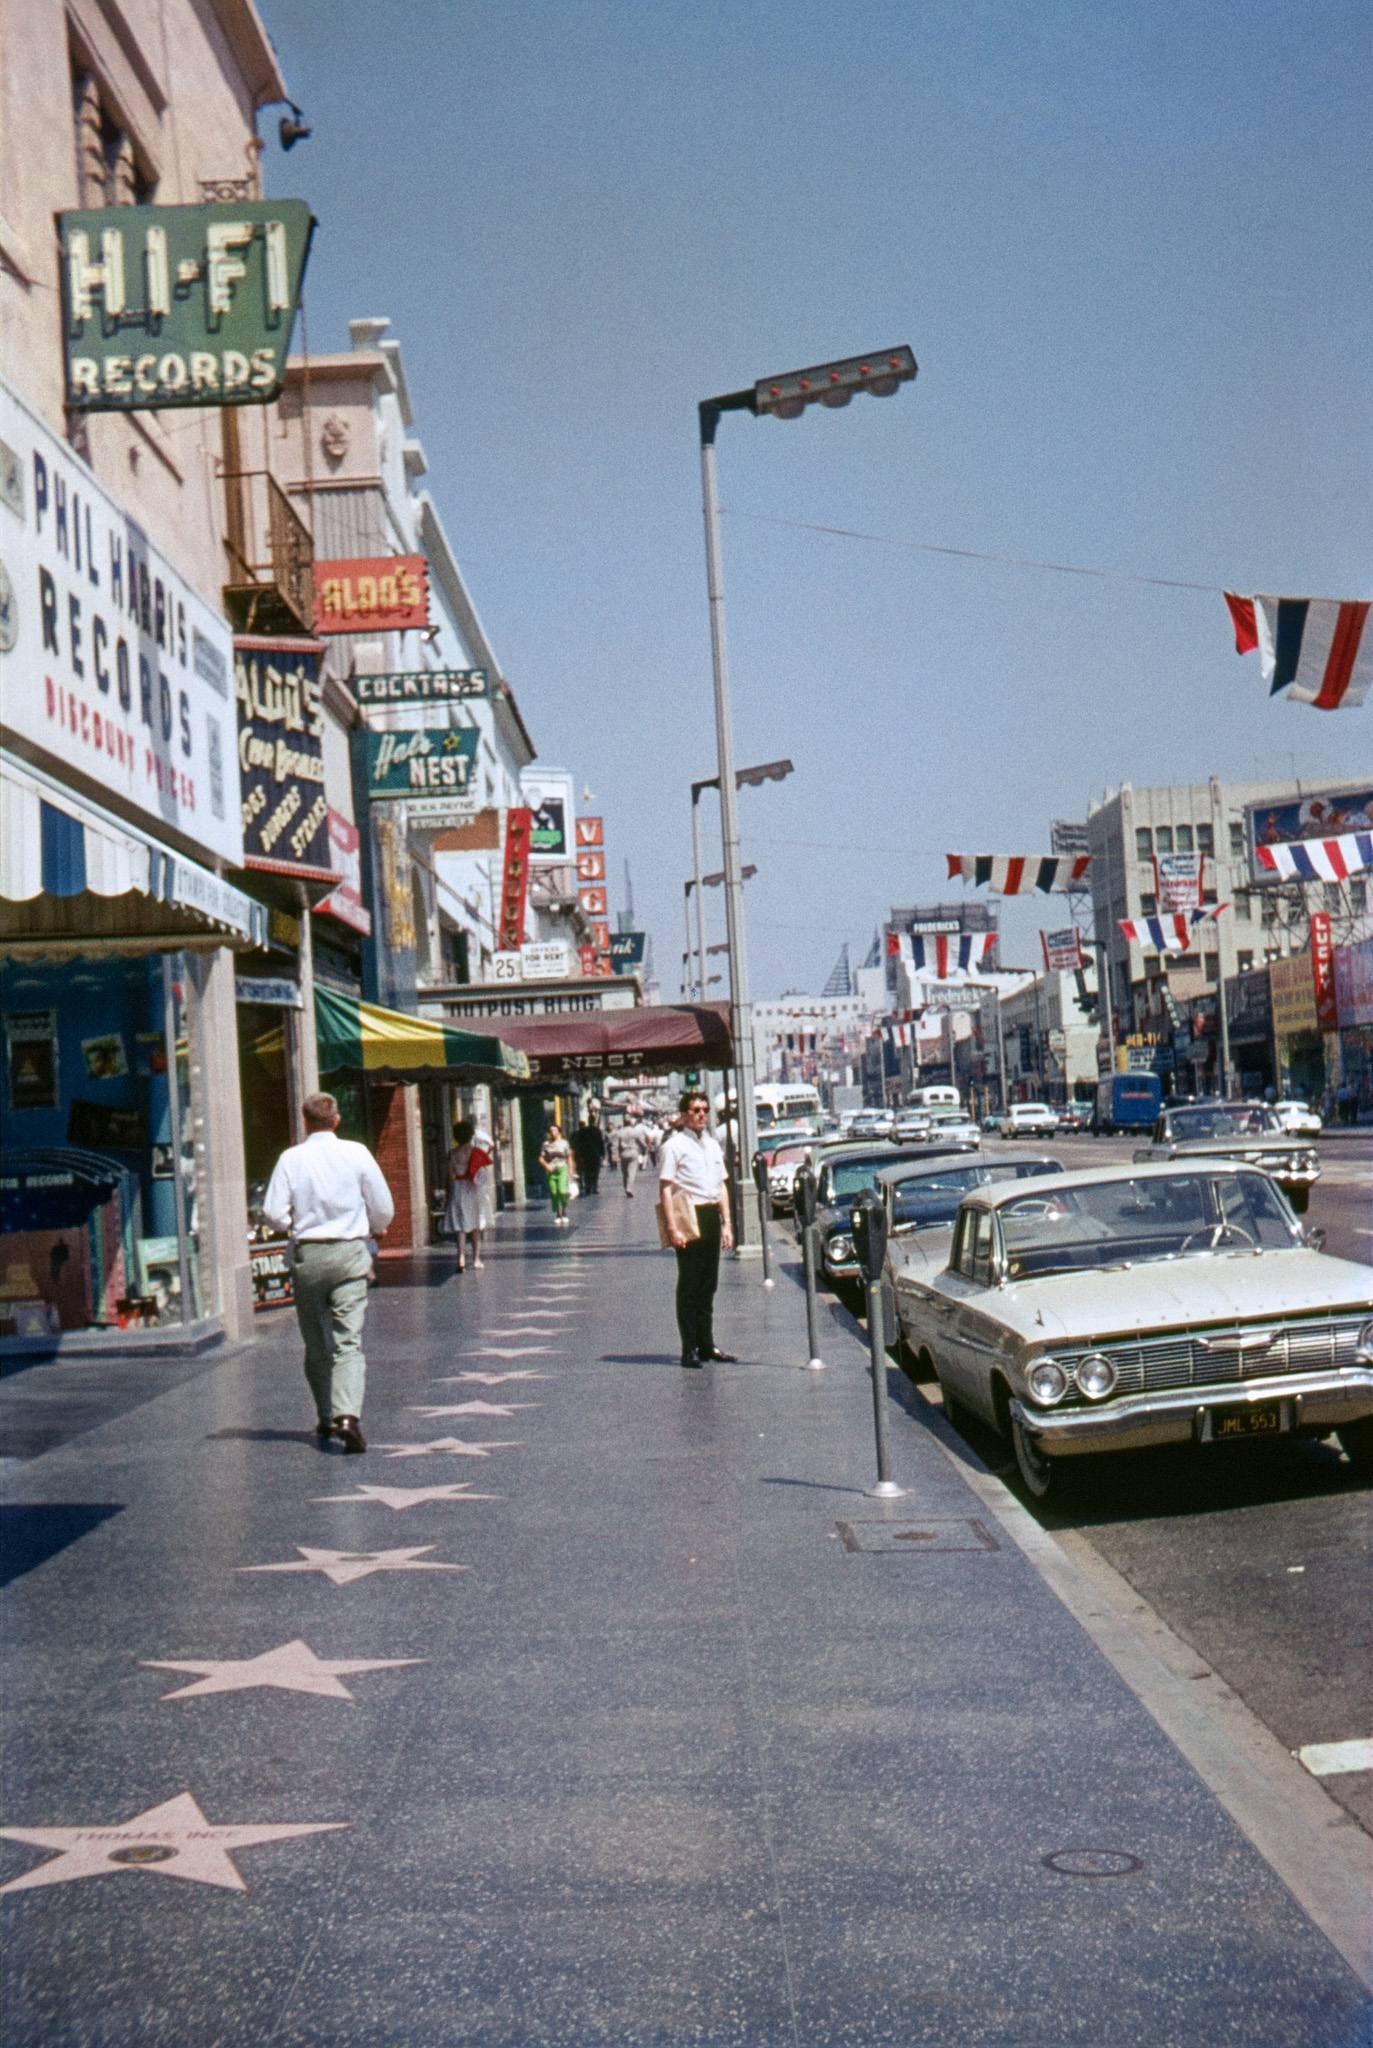 August 1963, Hollywood Boulevard. On "The Walk of Fame." My brother, standing down the block in the vicinity of the '61 Chevy, holds a bag of records, so we've just come out of Phil Harris Records on the left. No relation that I've been able to determine, but a notable Hollywood establishment nevertheless. Another is down the street: Frederick's. Nearest star is for early Hollywood pioneer Thomas Ince, a name definitely worth a Google. View full size.